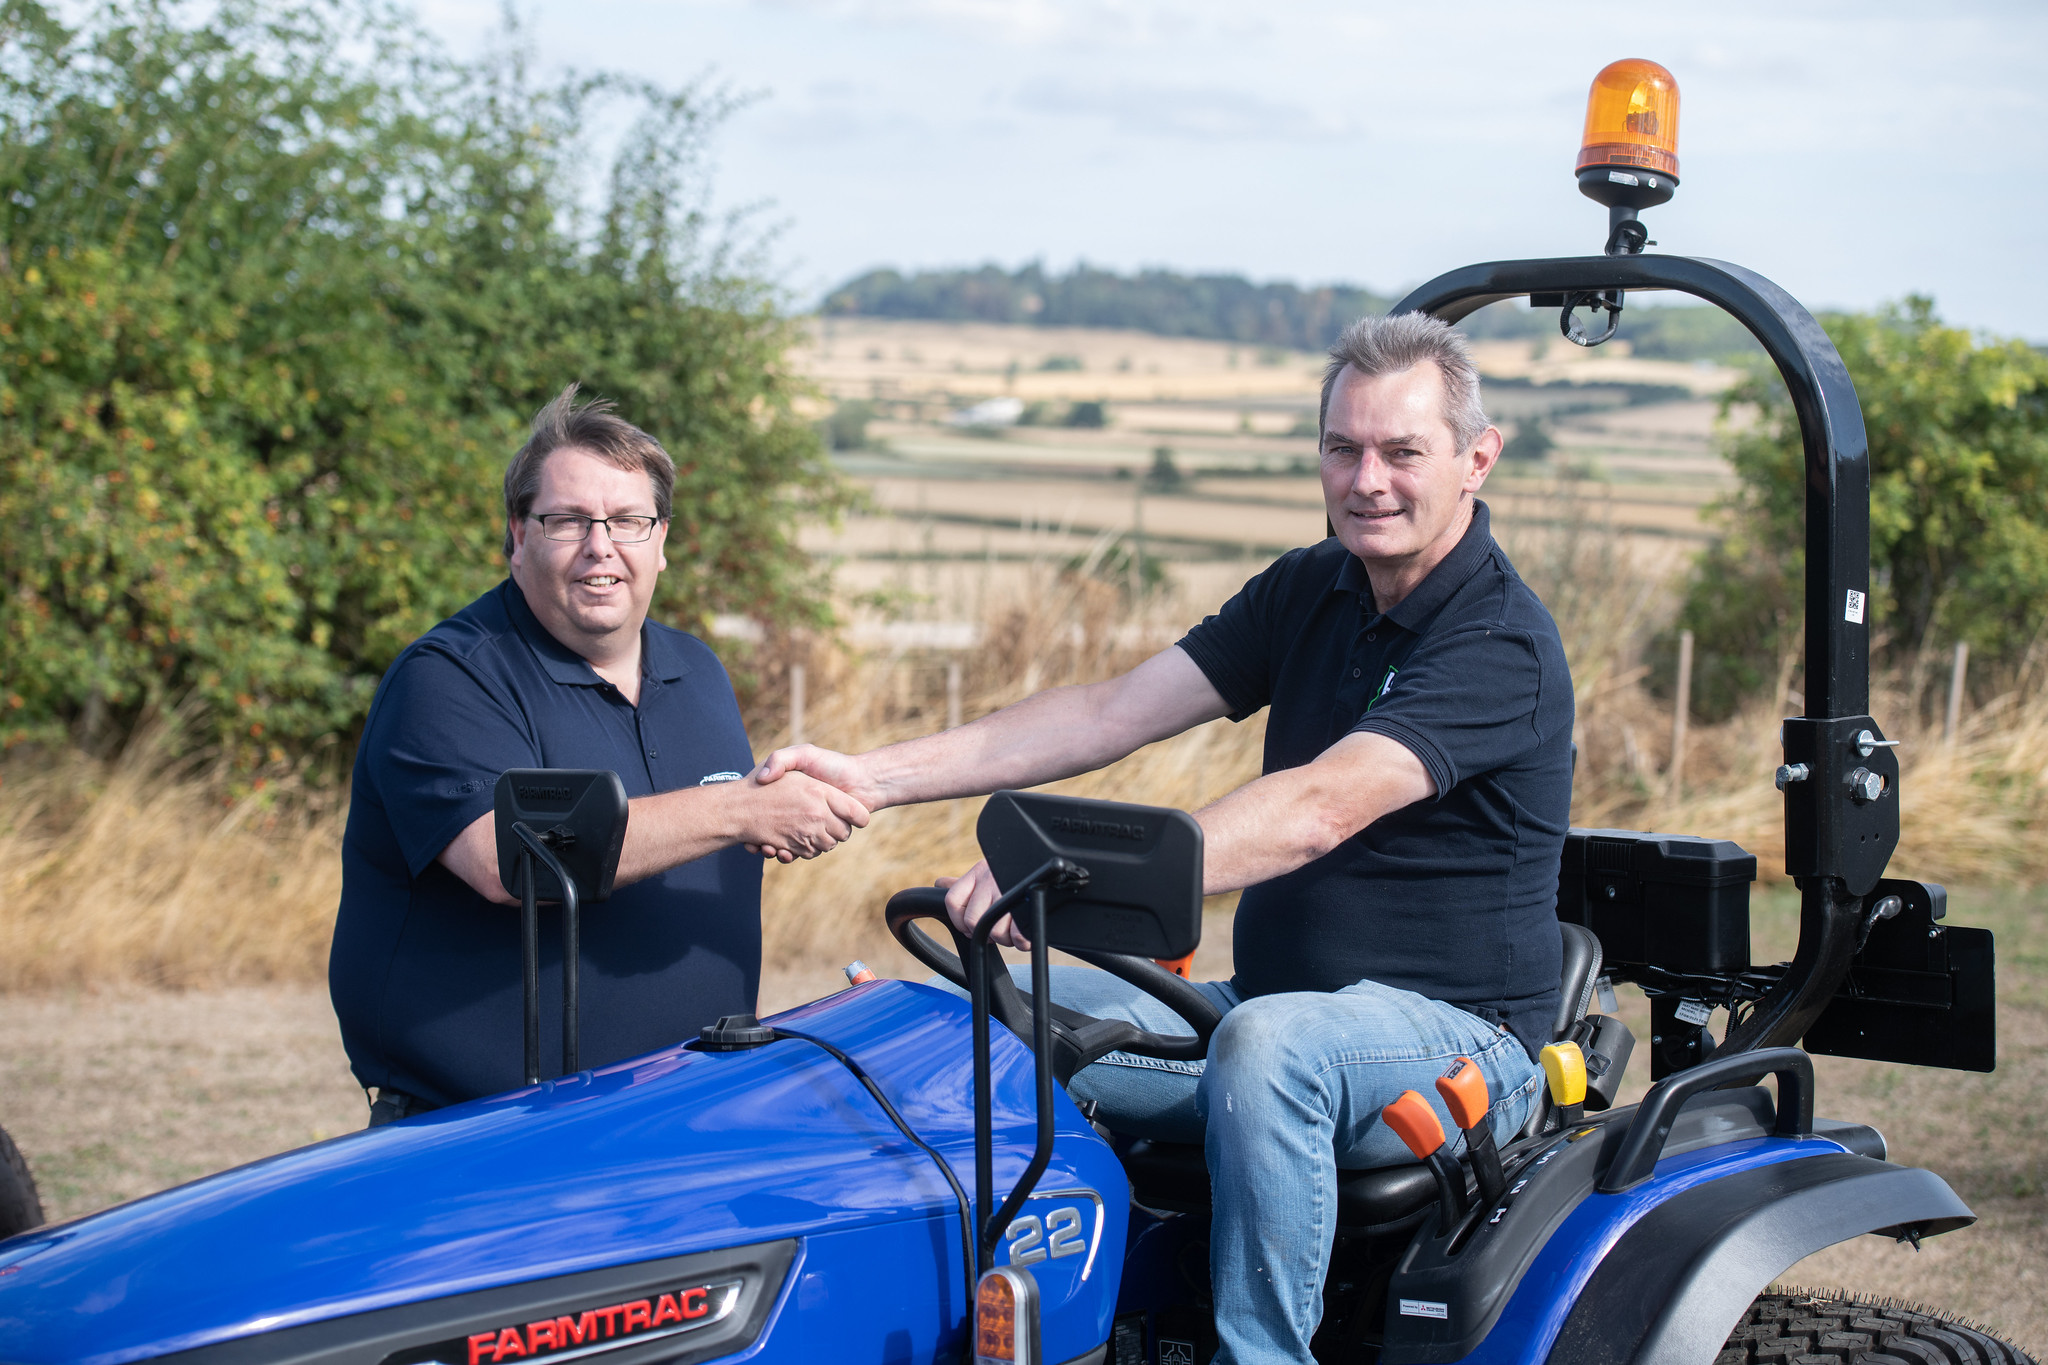 The Big Mower Company joins the Farmtrac dealer family